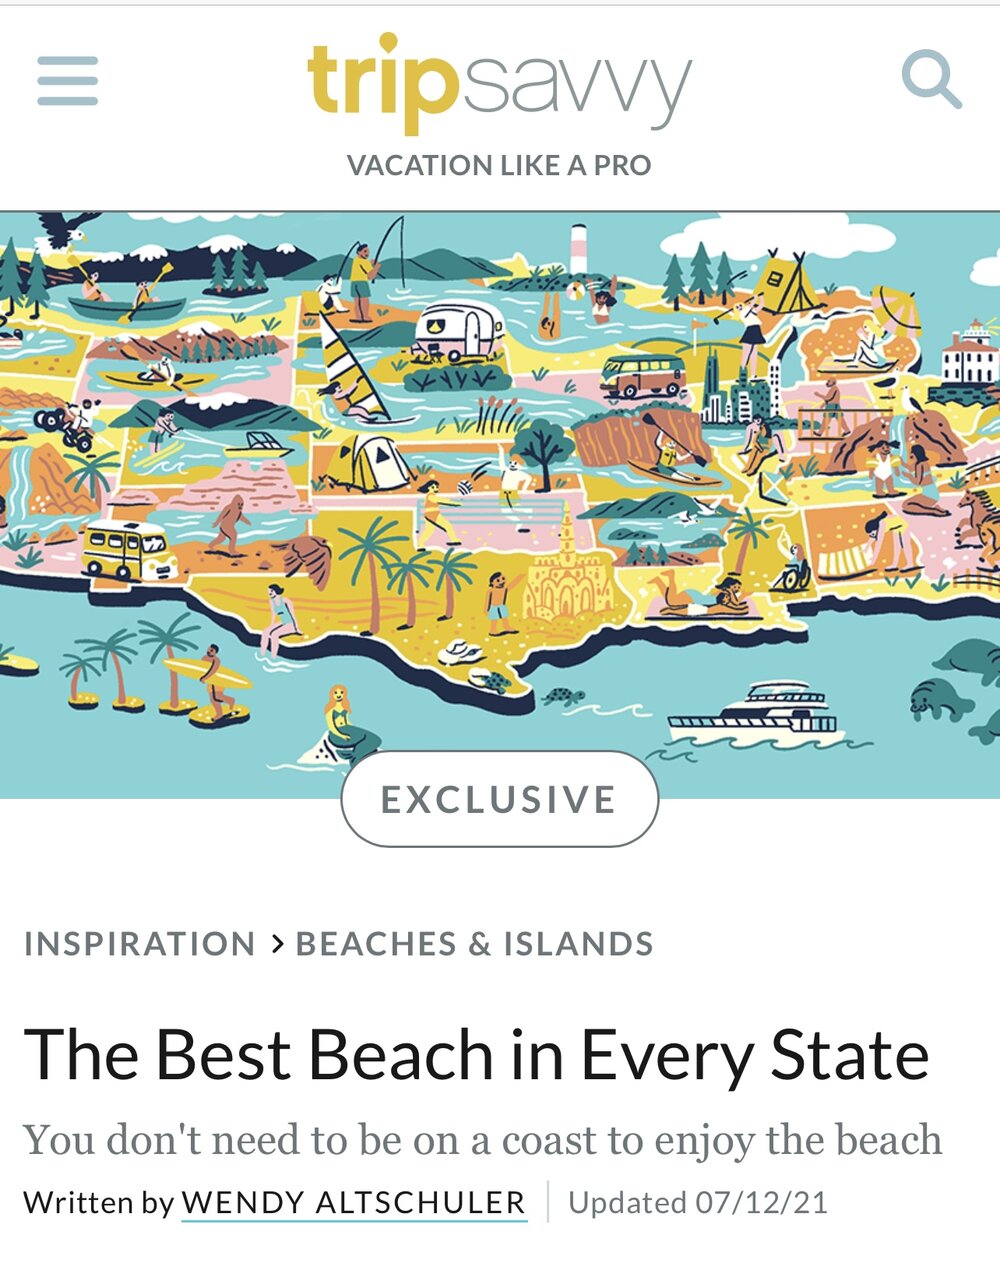 The Best Beach in Every State